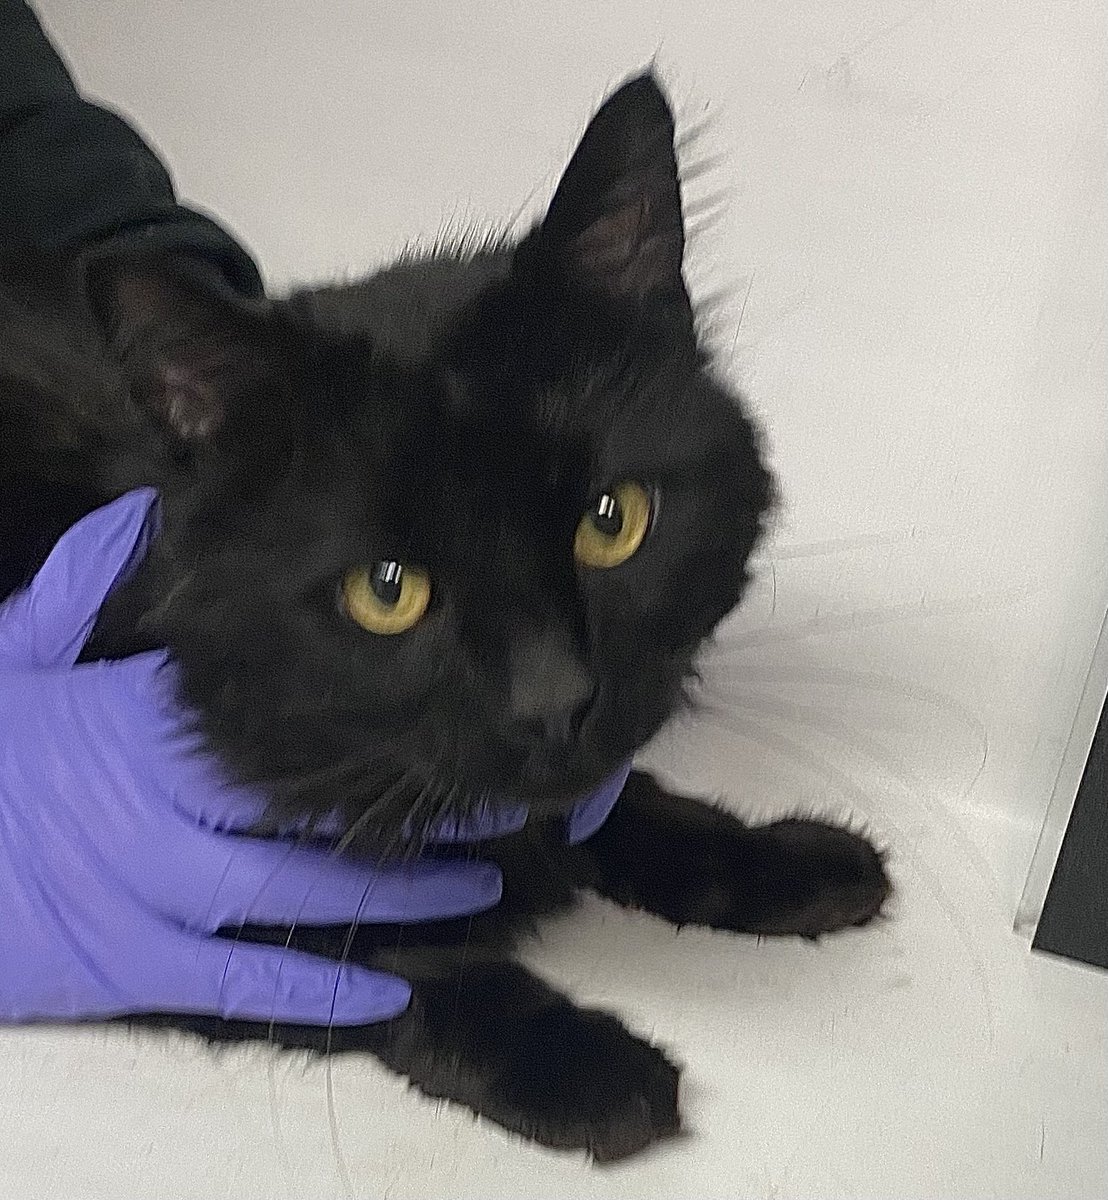 Client came to BACC with a black male cat (Rishi) with a collar. The client stated that the cat showed up in her back yard one week ago. Client stated that the cat had a collar on that was not a breakaway and he was dirty matted and very skinny. facebook.com/photo?fbid=838…